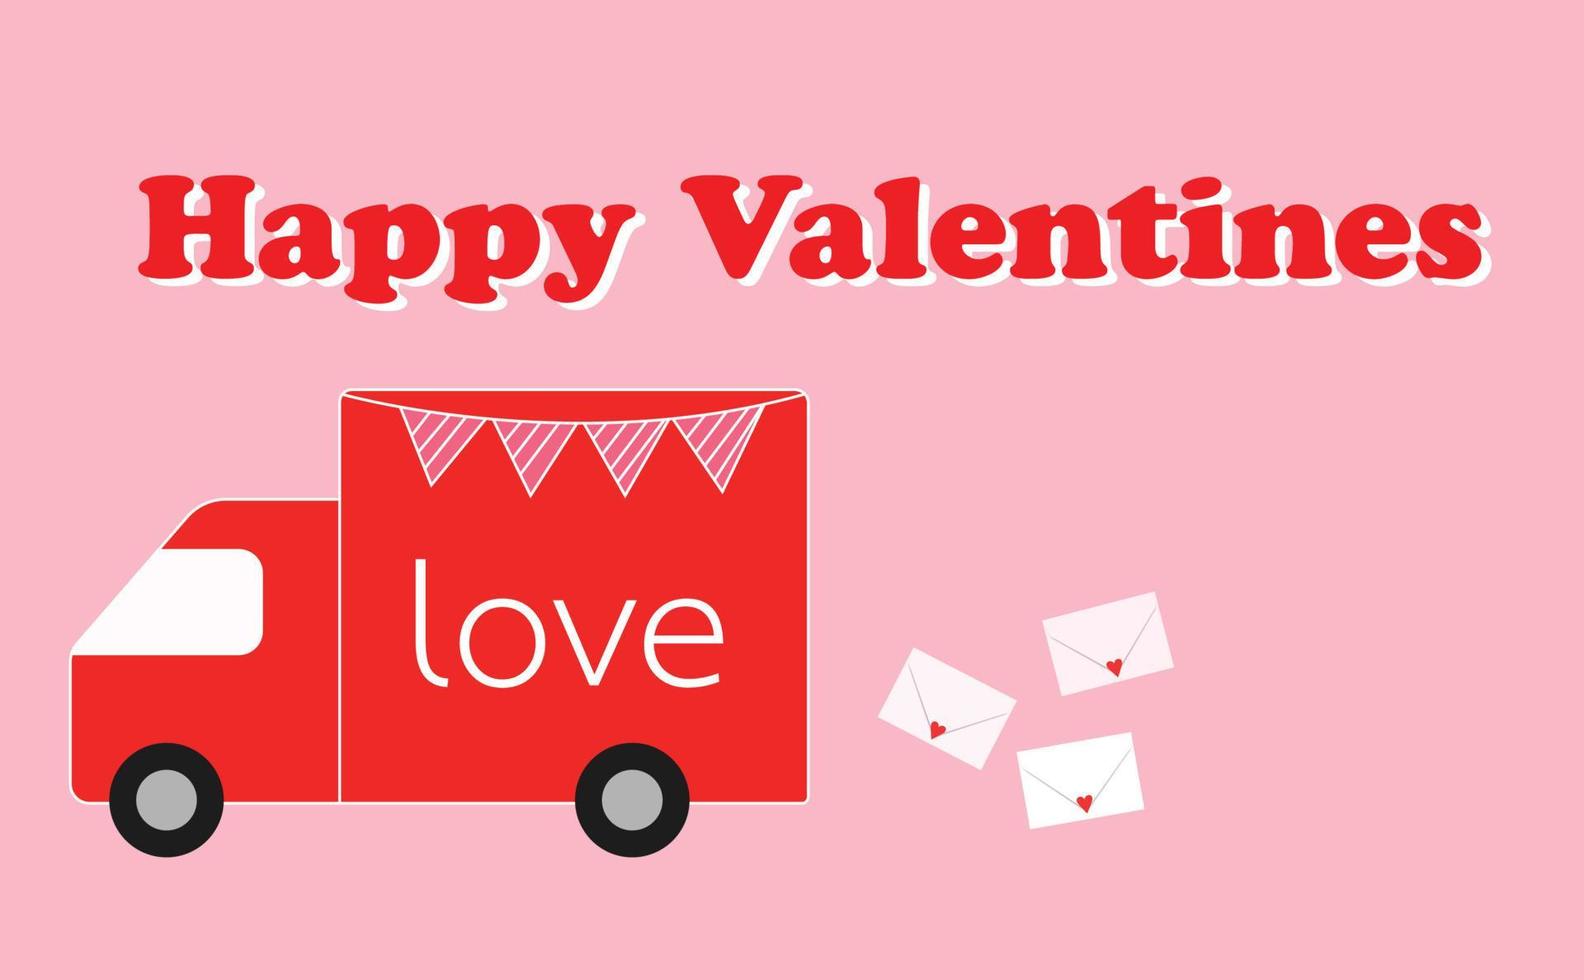 Love truck Valentine's day, cute red car carries heart maill. vector